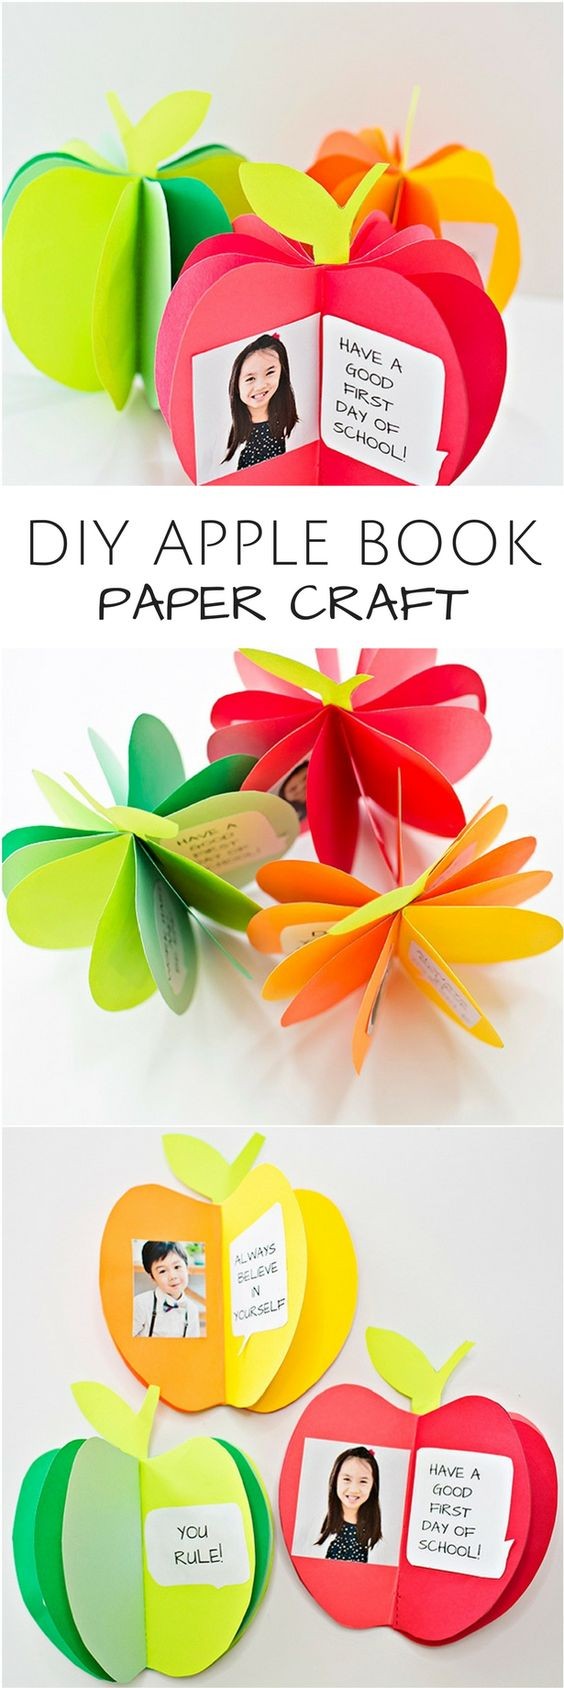 Apple Papercraft Diy 3d Apple Book Paper Craft Cute Back to School Craft for Kids or